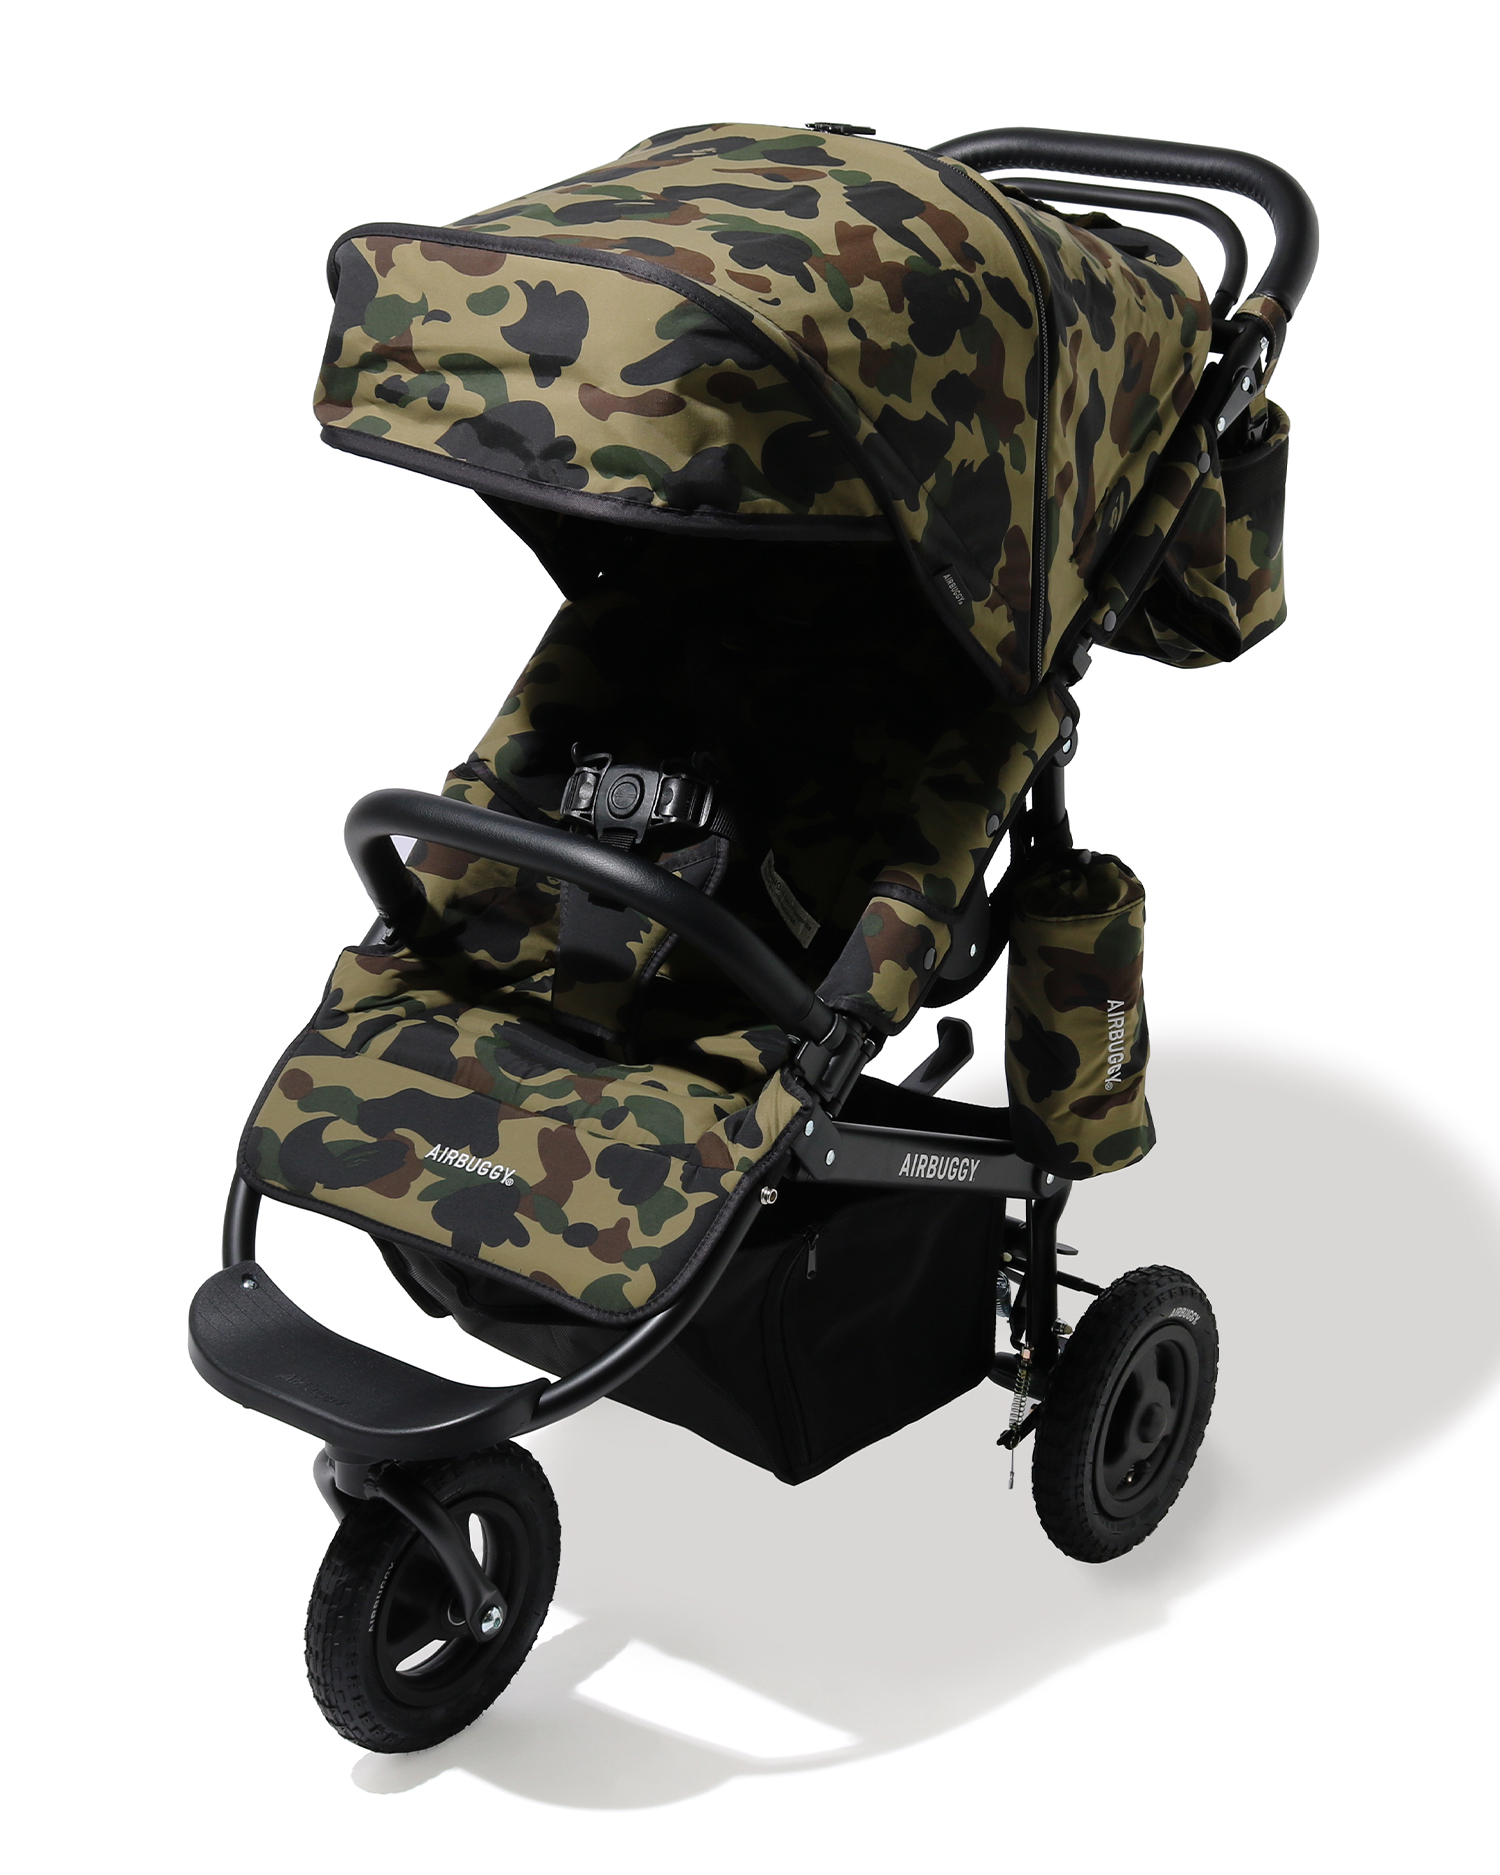 Shop X Airbuggy 1st Camo Airbuggy Stroller Online | BAPE